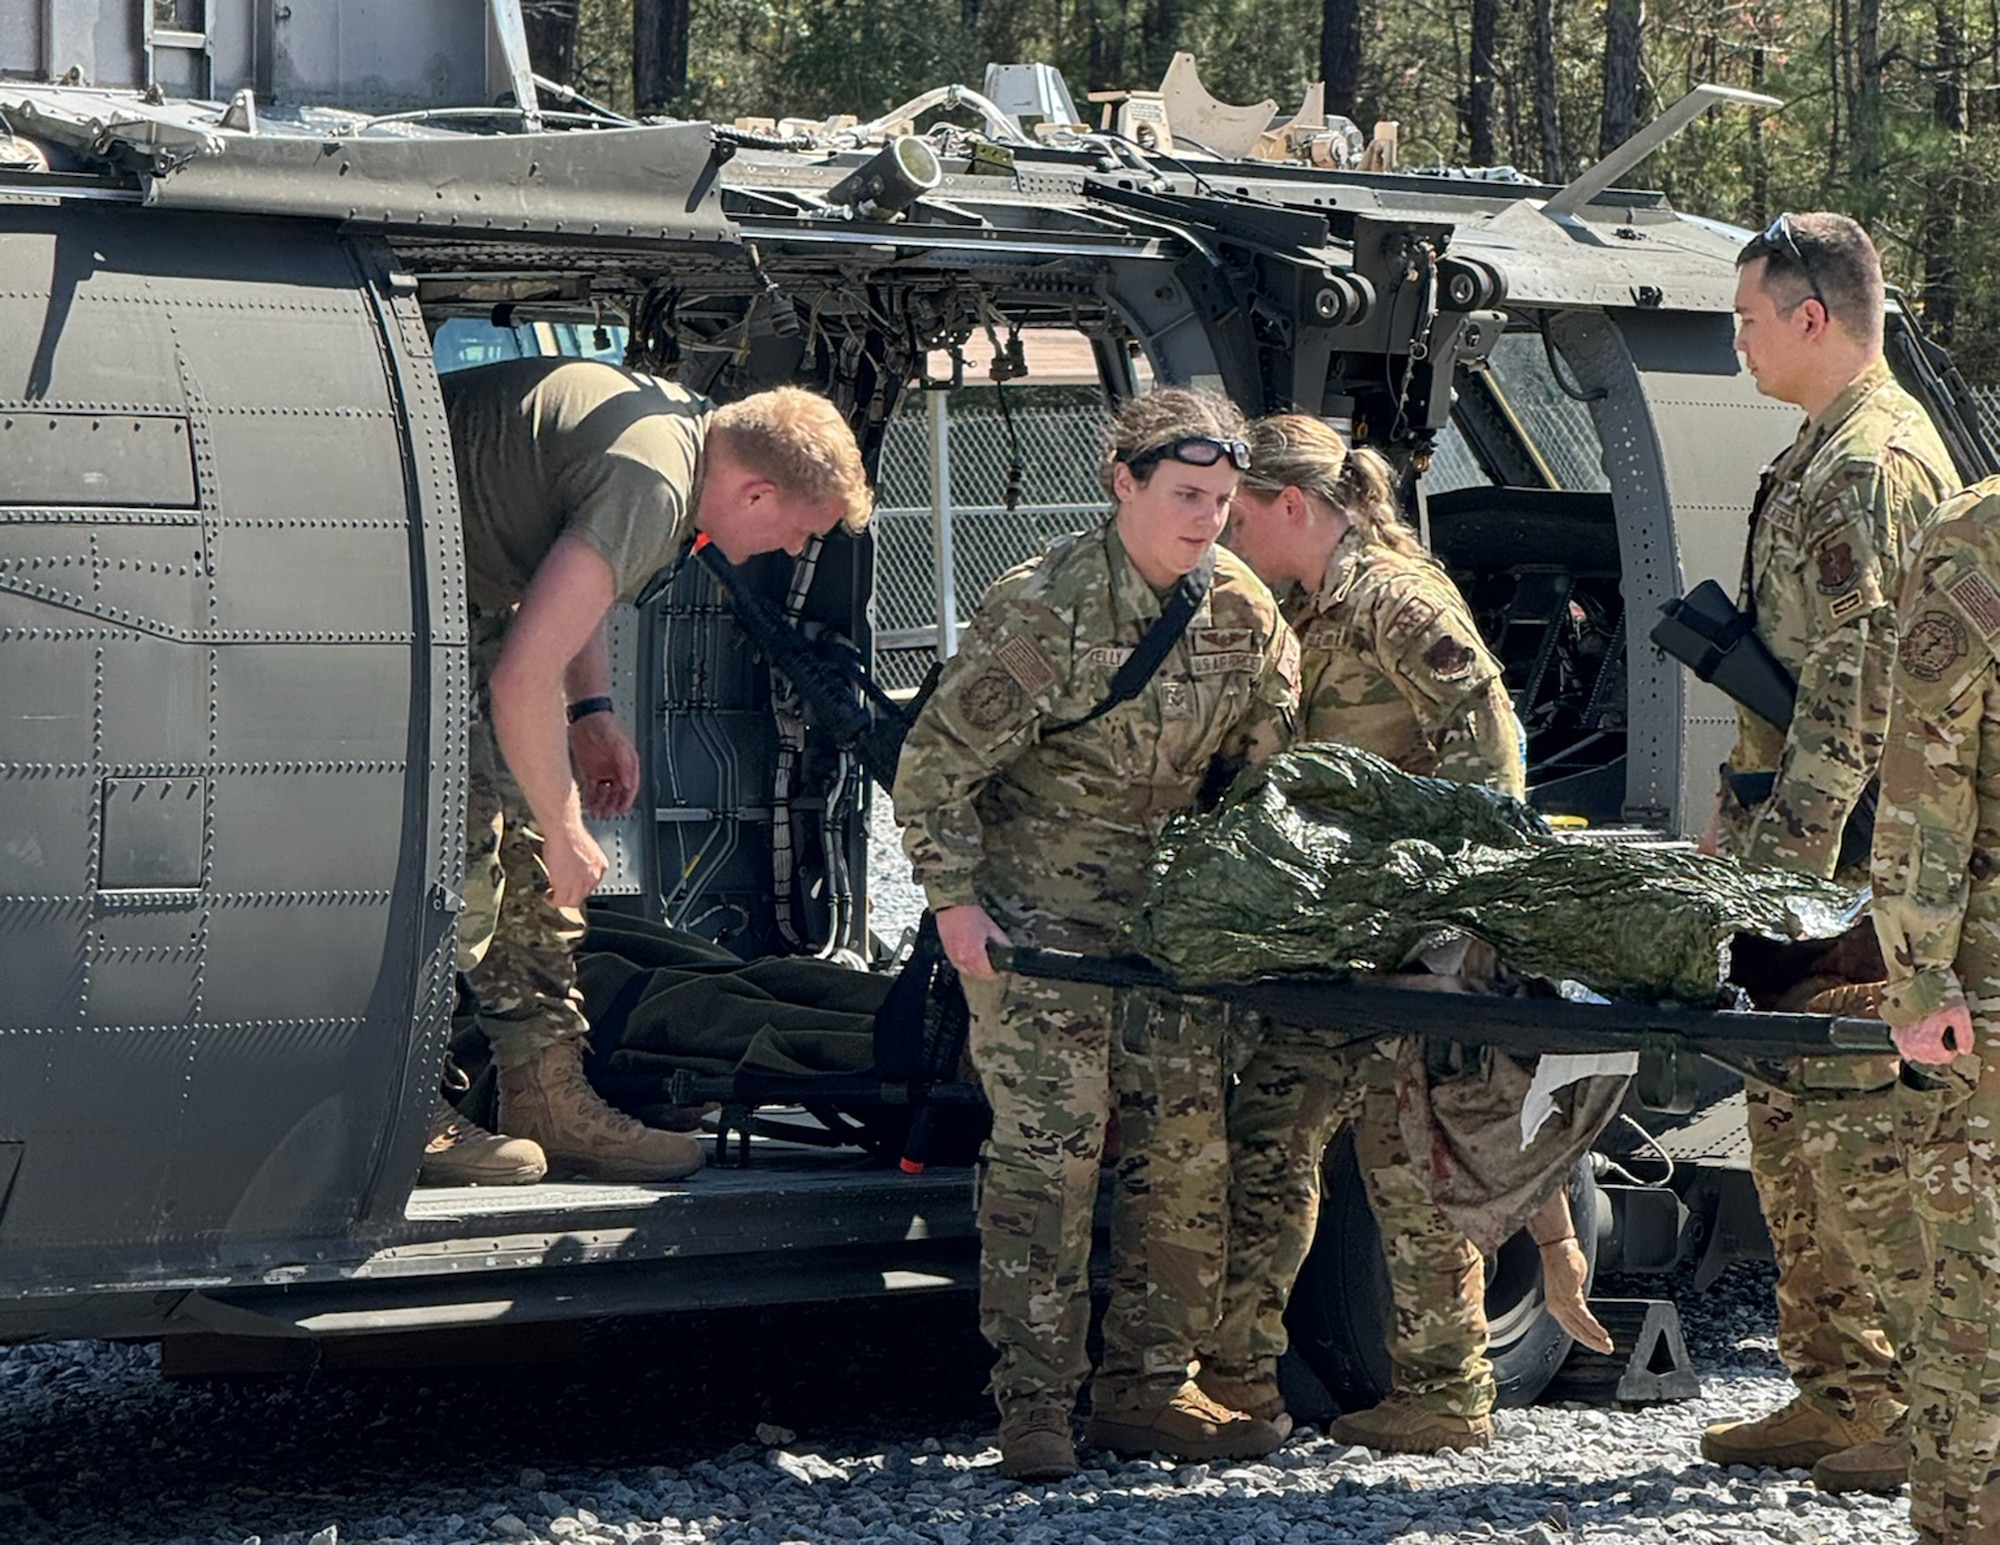 U.S. Air Force Airmen from the 109th Aeromedical Evacuation Squadron offload a simulated patient from a helicopter at Camp Shelby Joint Forces Training Auxiliary Airfield, Hattiesburg, Miss., March 6, 2024.